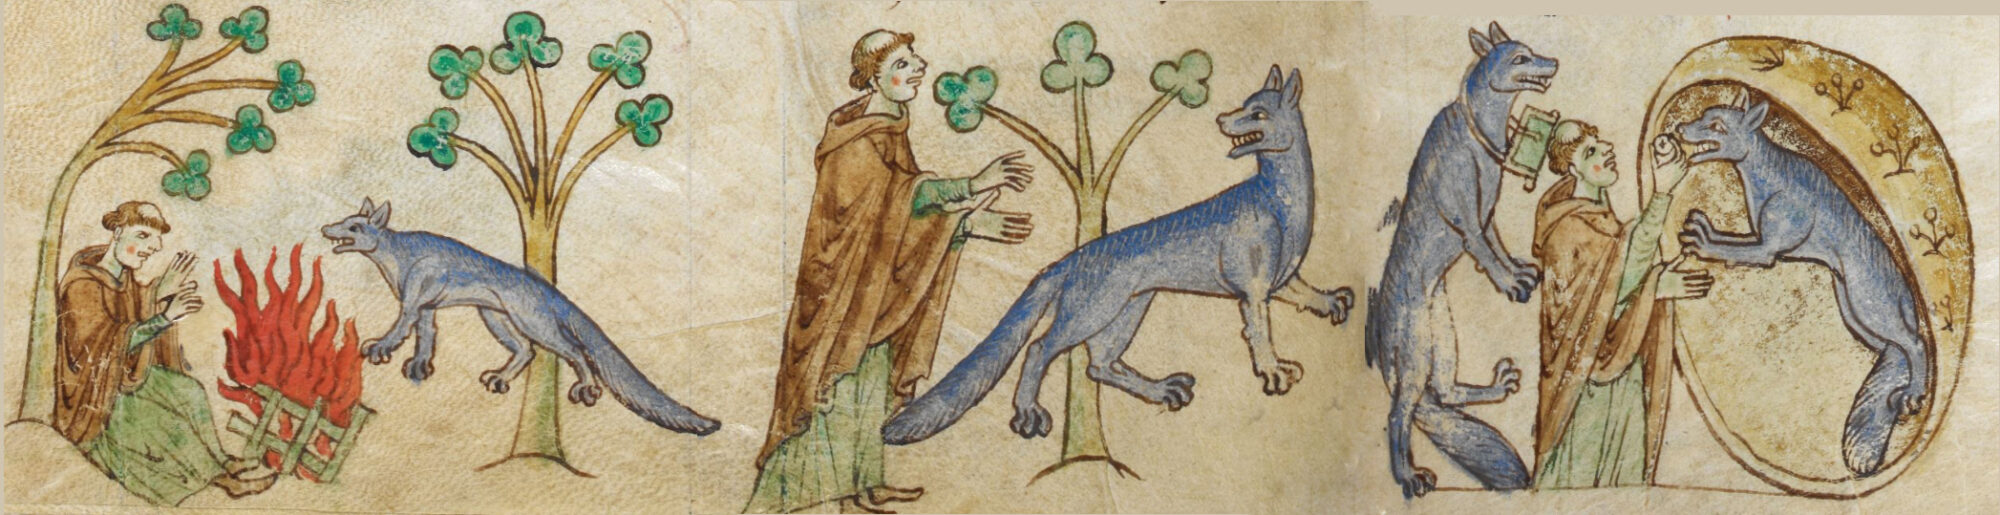 A fable was told about a man, who had been condemned to live seven years as a wolf. At some point, the werewulf sought out a priest travelling through the wilderness to ask him to hel his mate, a shewolf with the viaticum. Royal MS 13 B VIII, c 1196-1223, The manuscript includes an anthology of texts on topography, history and marvels of the world, relating to Ireland and Wales.Contents:1. Gerald of Wales, Topographia Hiberniae (Topographia Hibernica) (ff. 1r-34v) 17c-18r